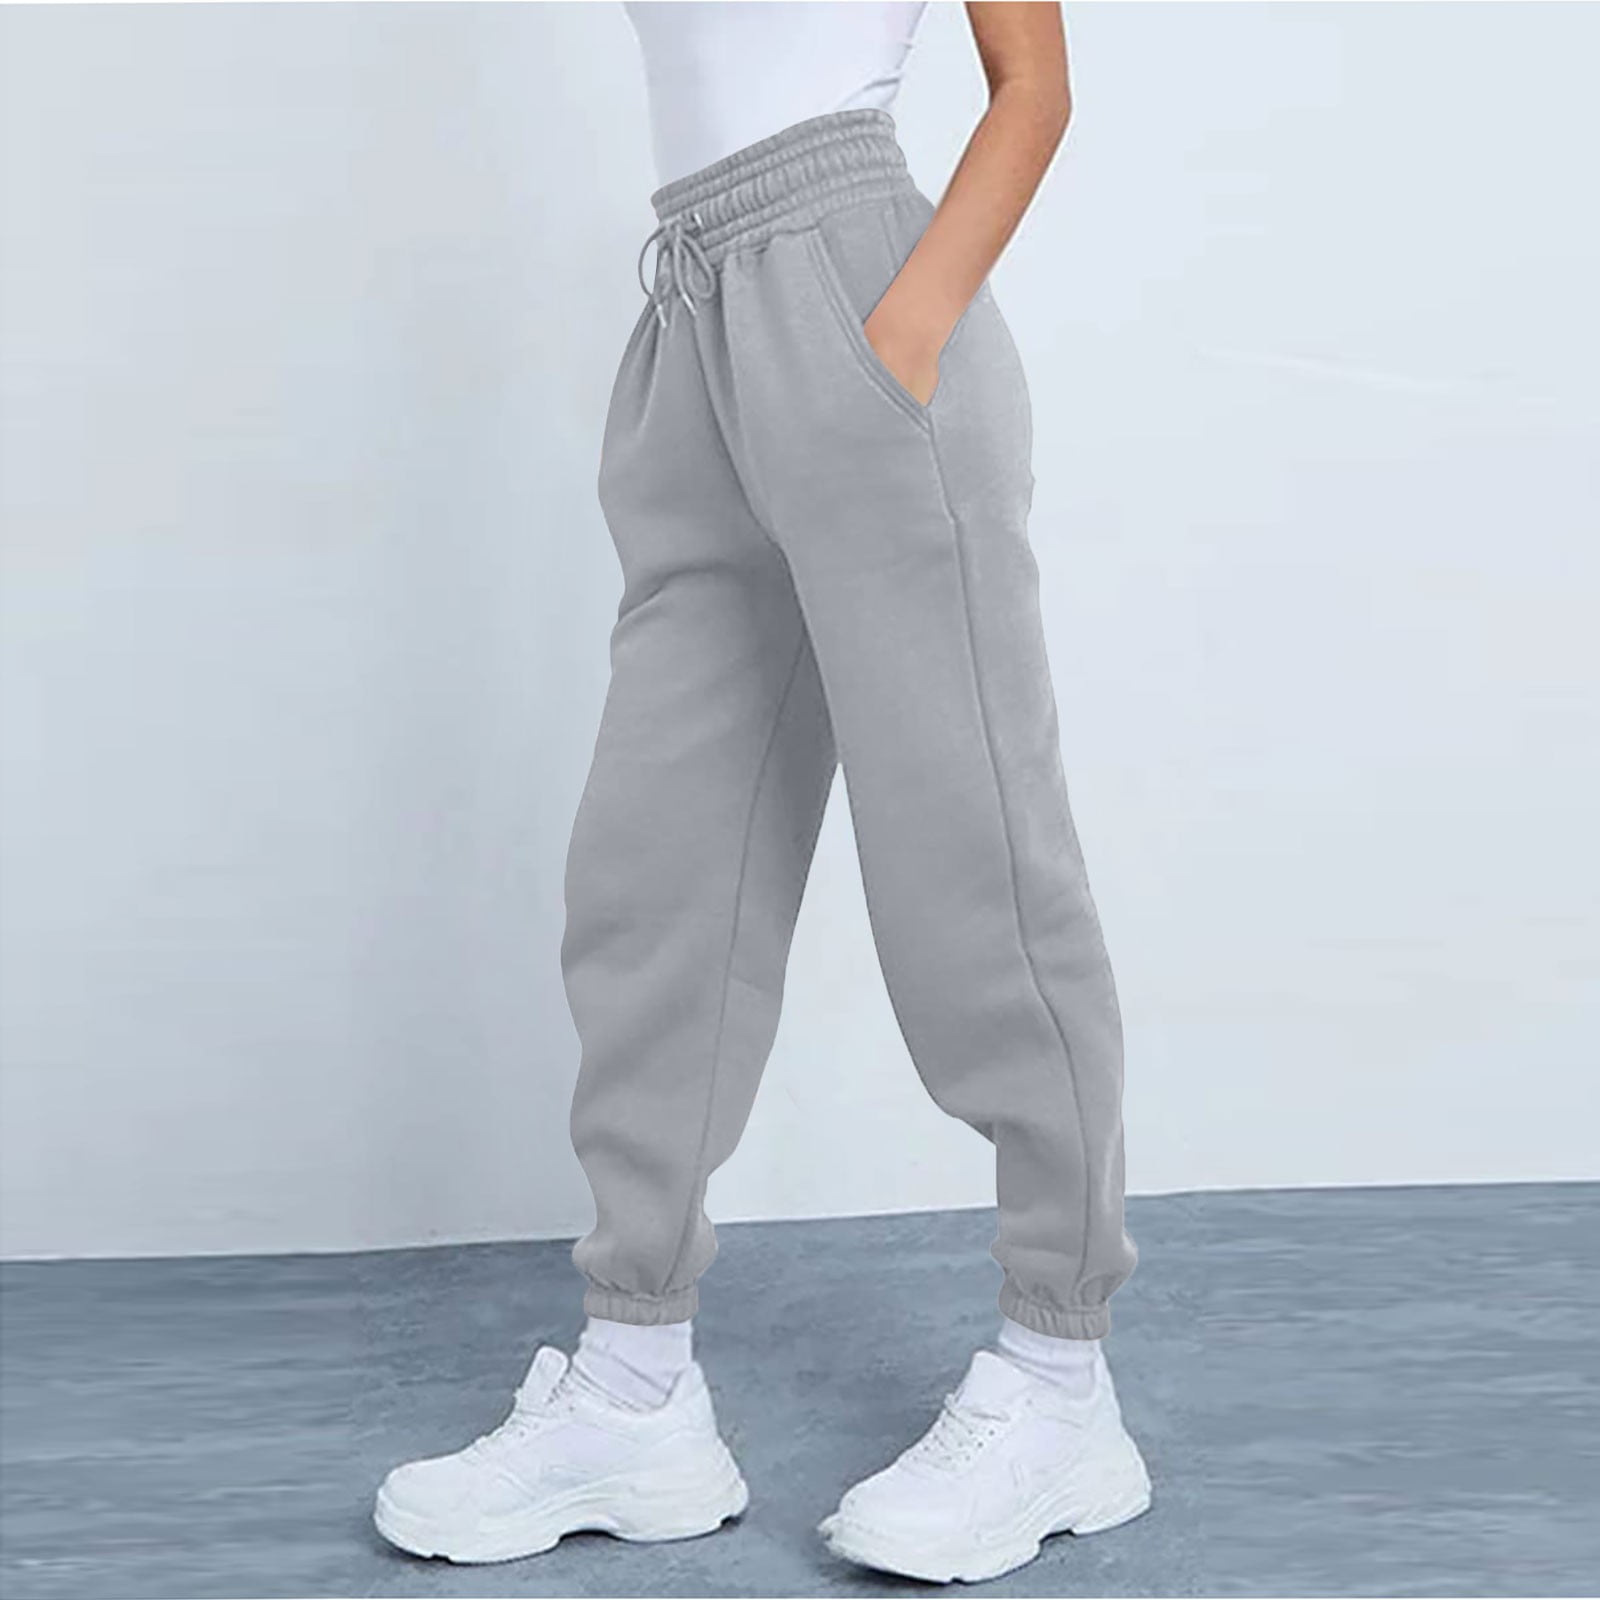  GWNWTT Women's Sweatpants Knot Front Boot-Cut Sweatpants  Sweatpants (Color : Gray, Size : X-Small) : Clothing, Shoes & Jewelry